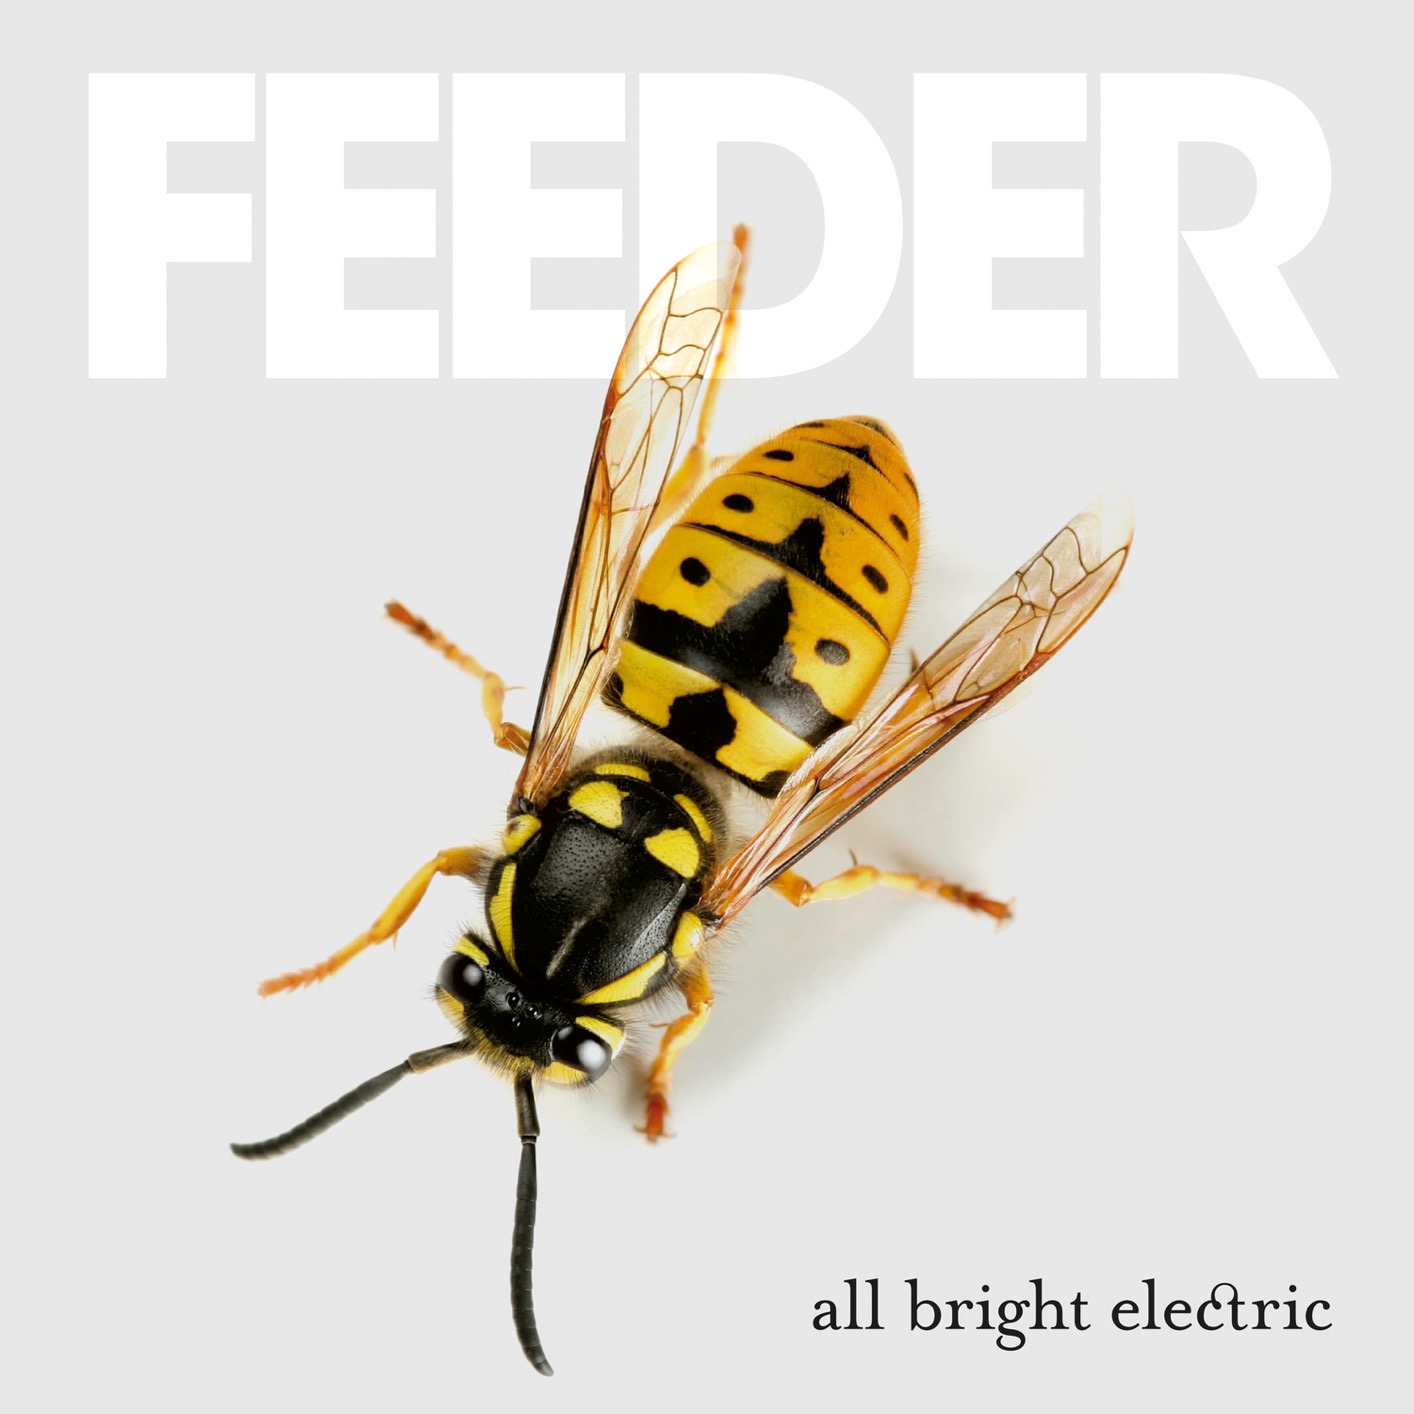 Feeder – All Bright Electric (Deluxe Version) (2016/2018) [FLAC 24bit/44,1kHz]